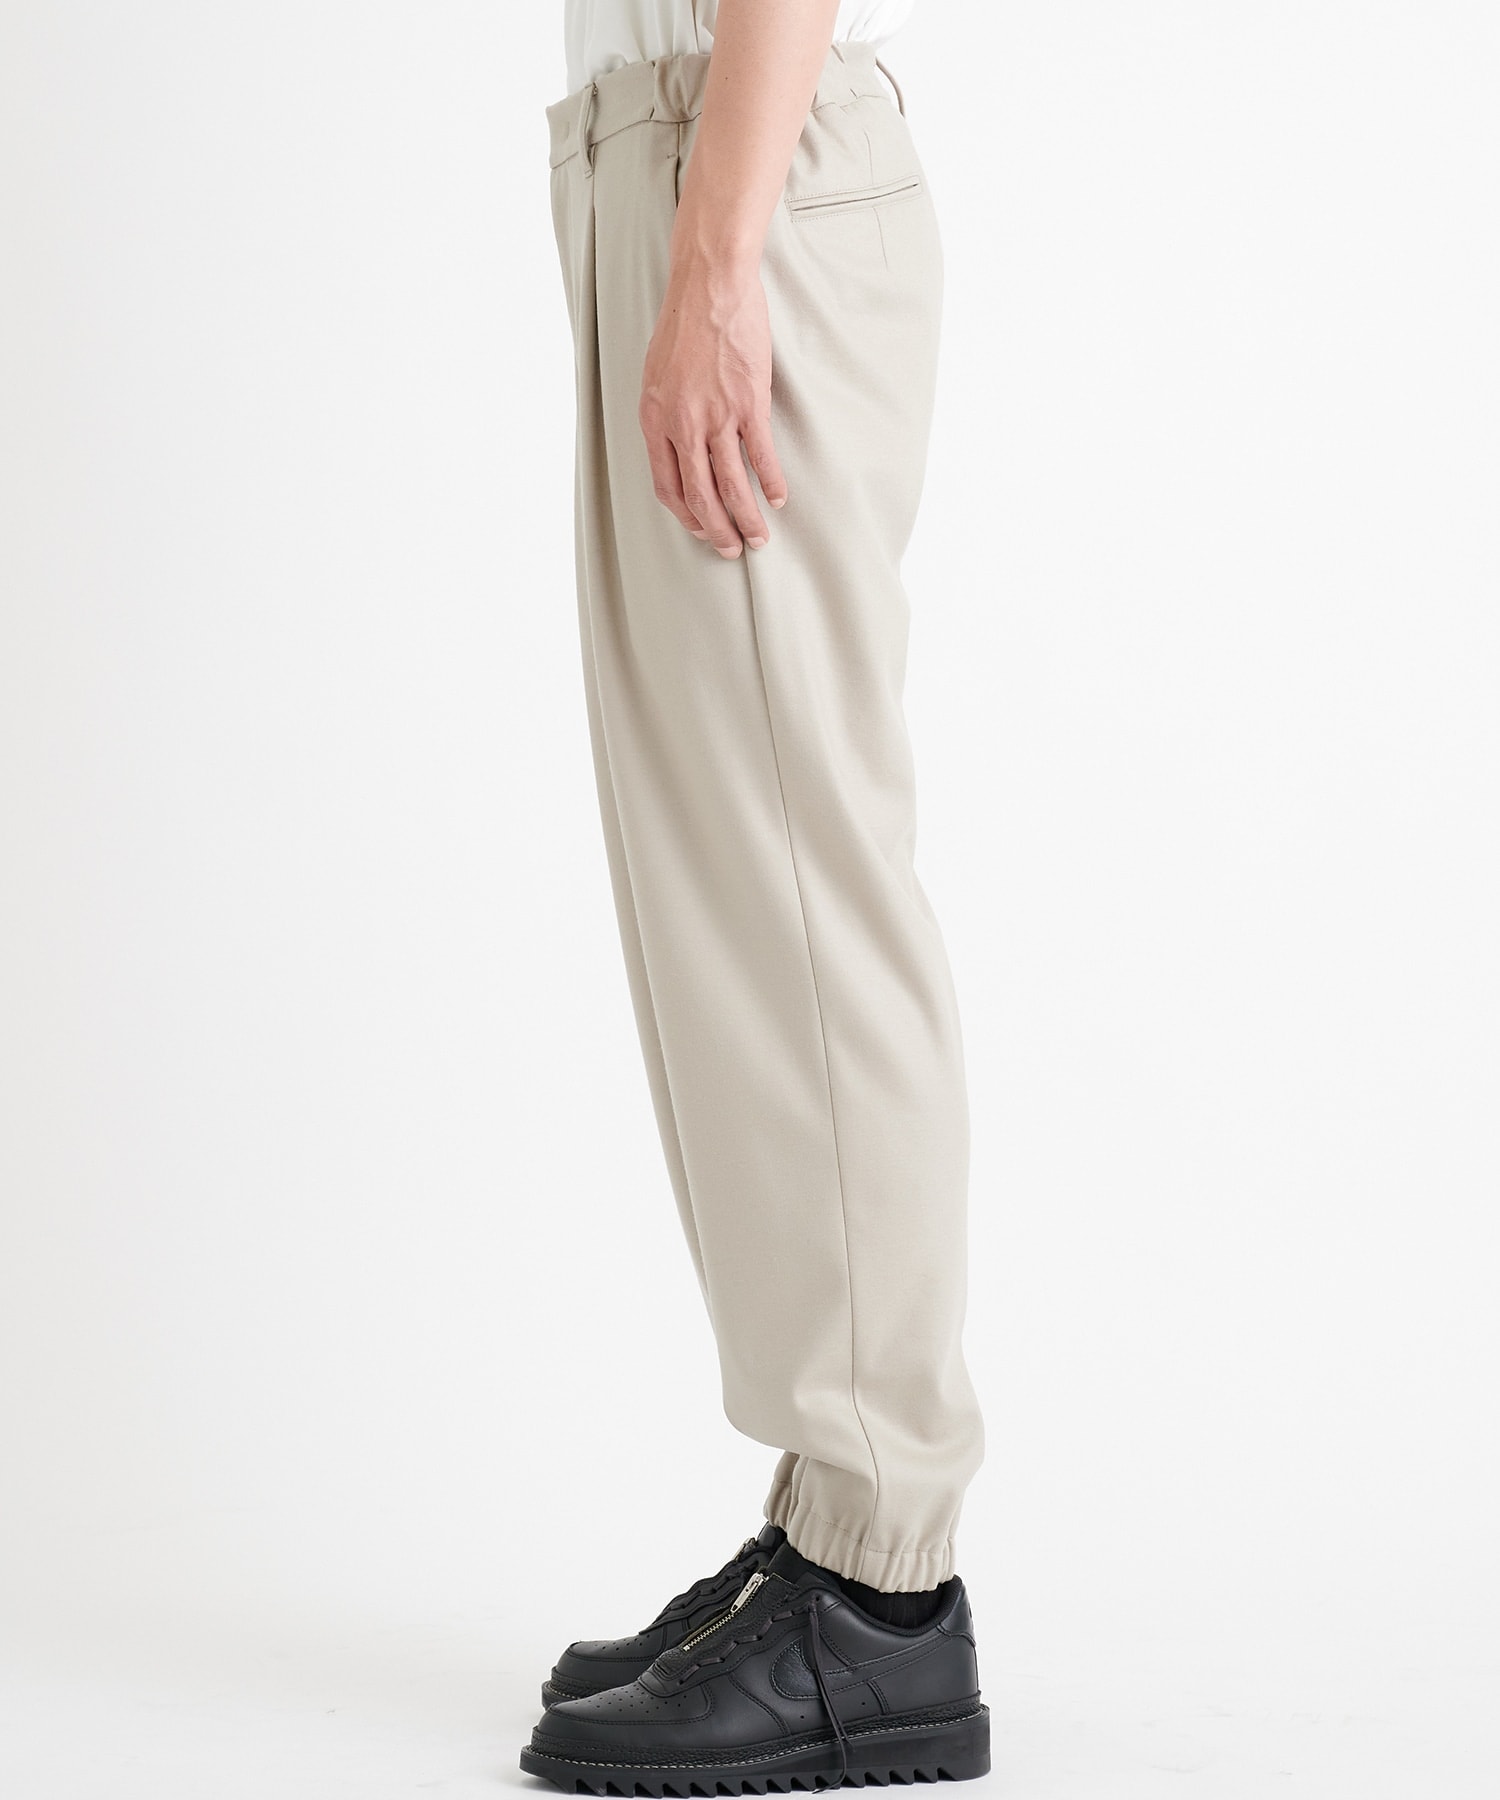 Flanne Lana Cashmere Touch Easy Pants THE TOKYO